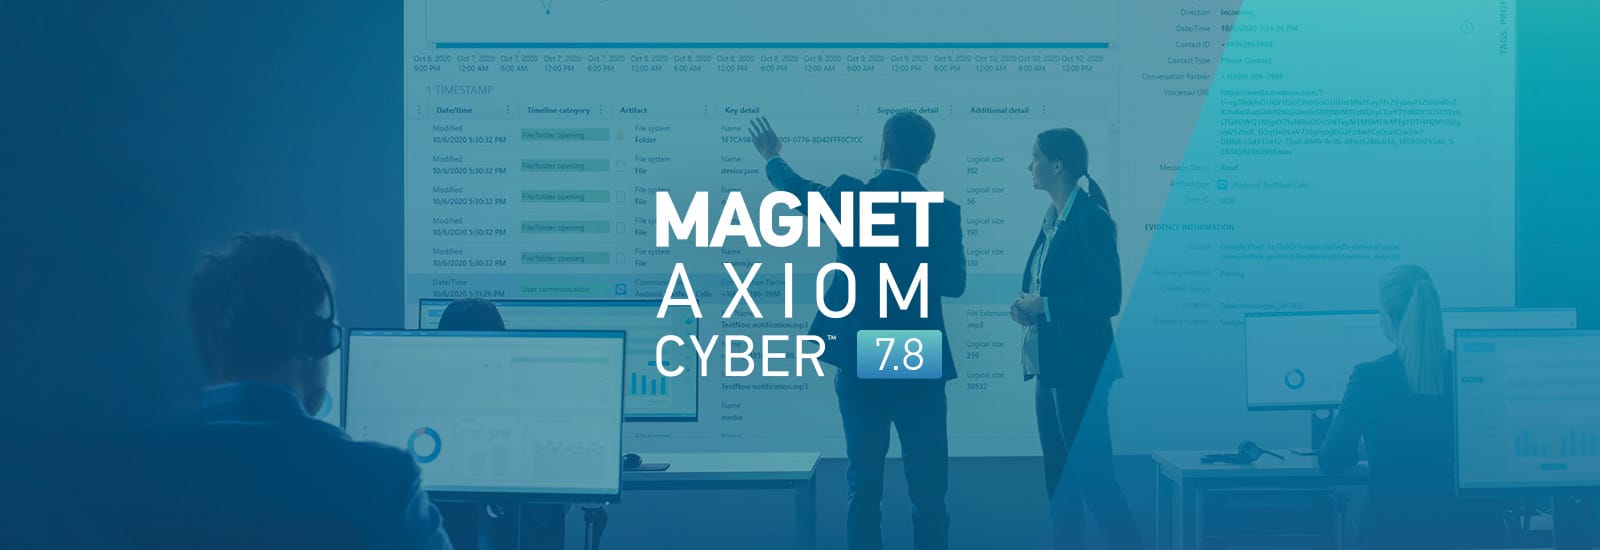 A decorative header for the Magnet AXIOM Cyber 7.8 release